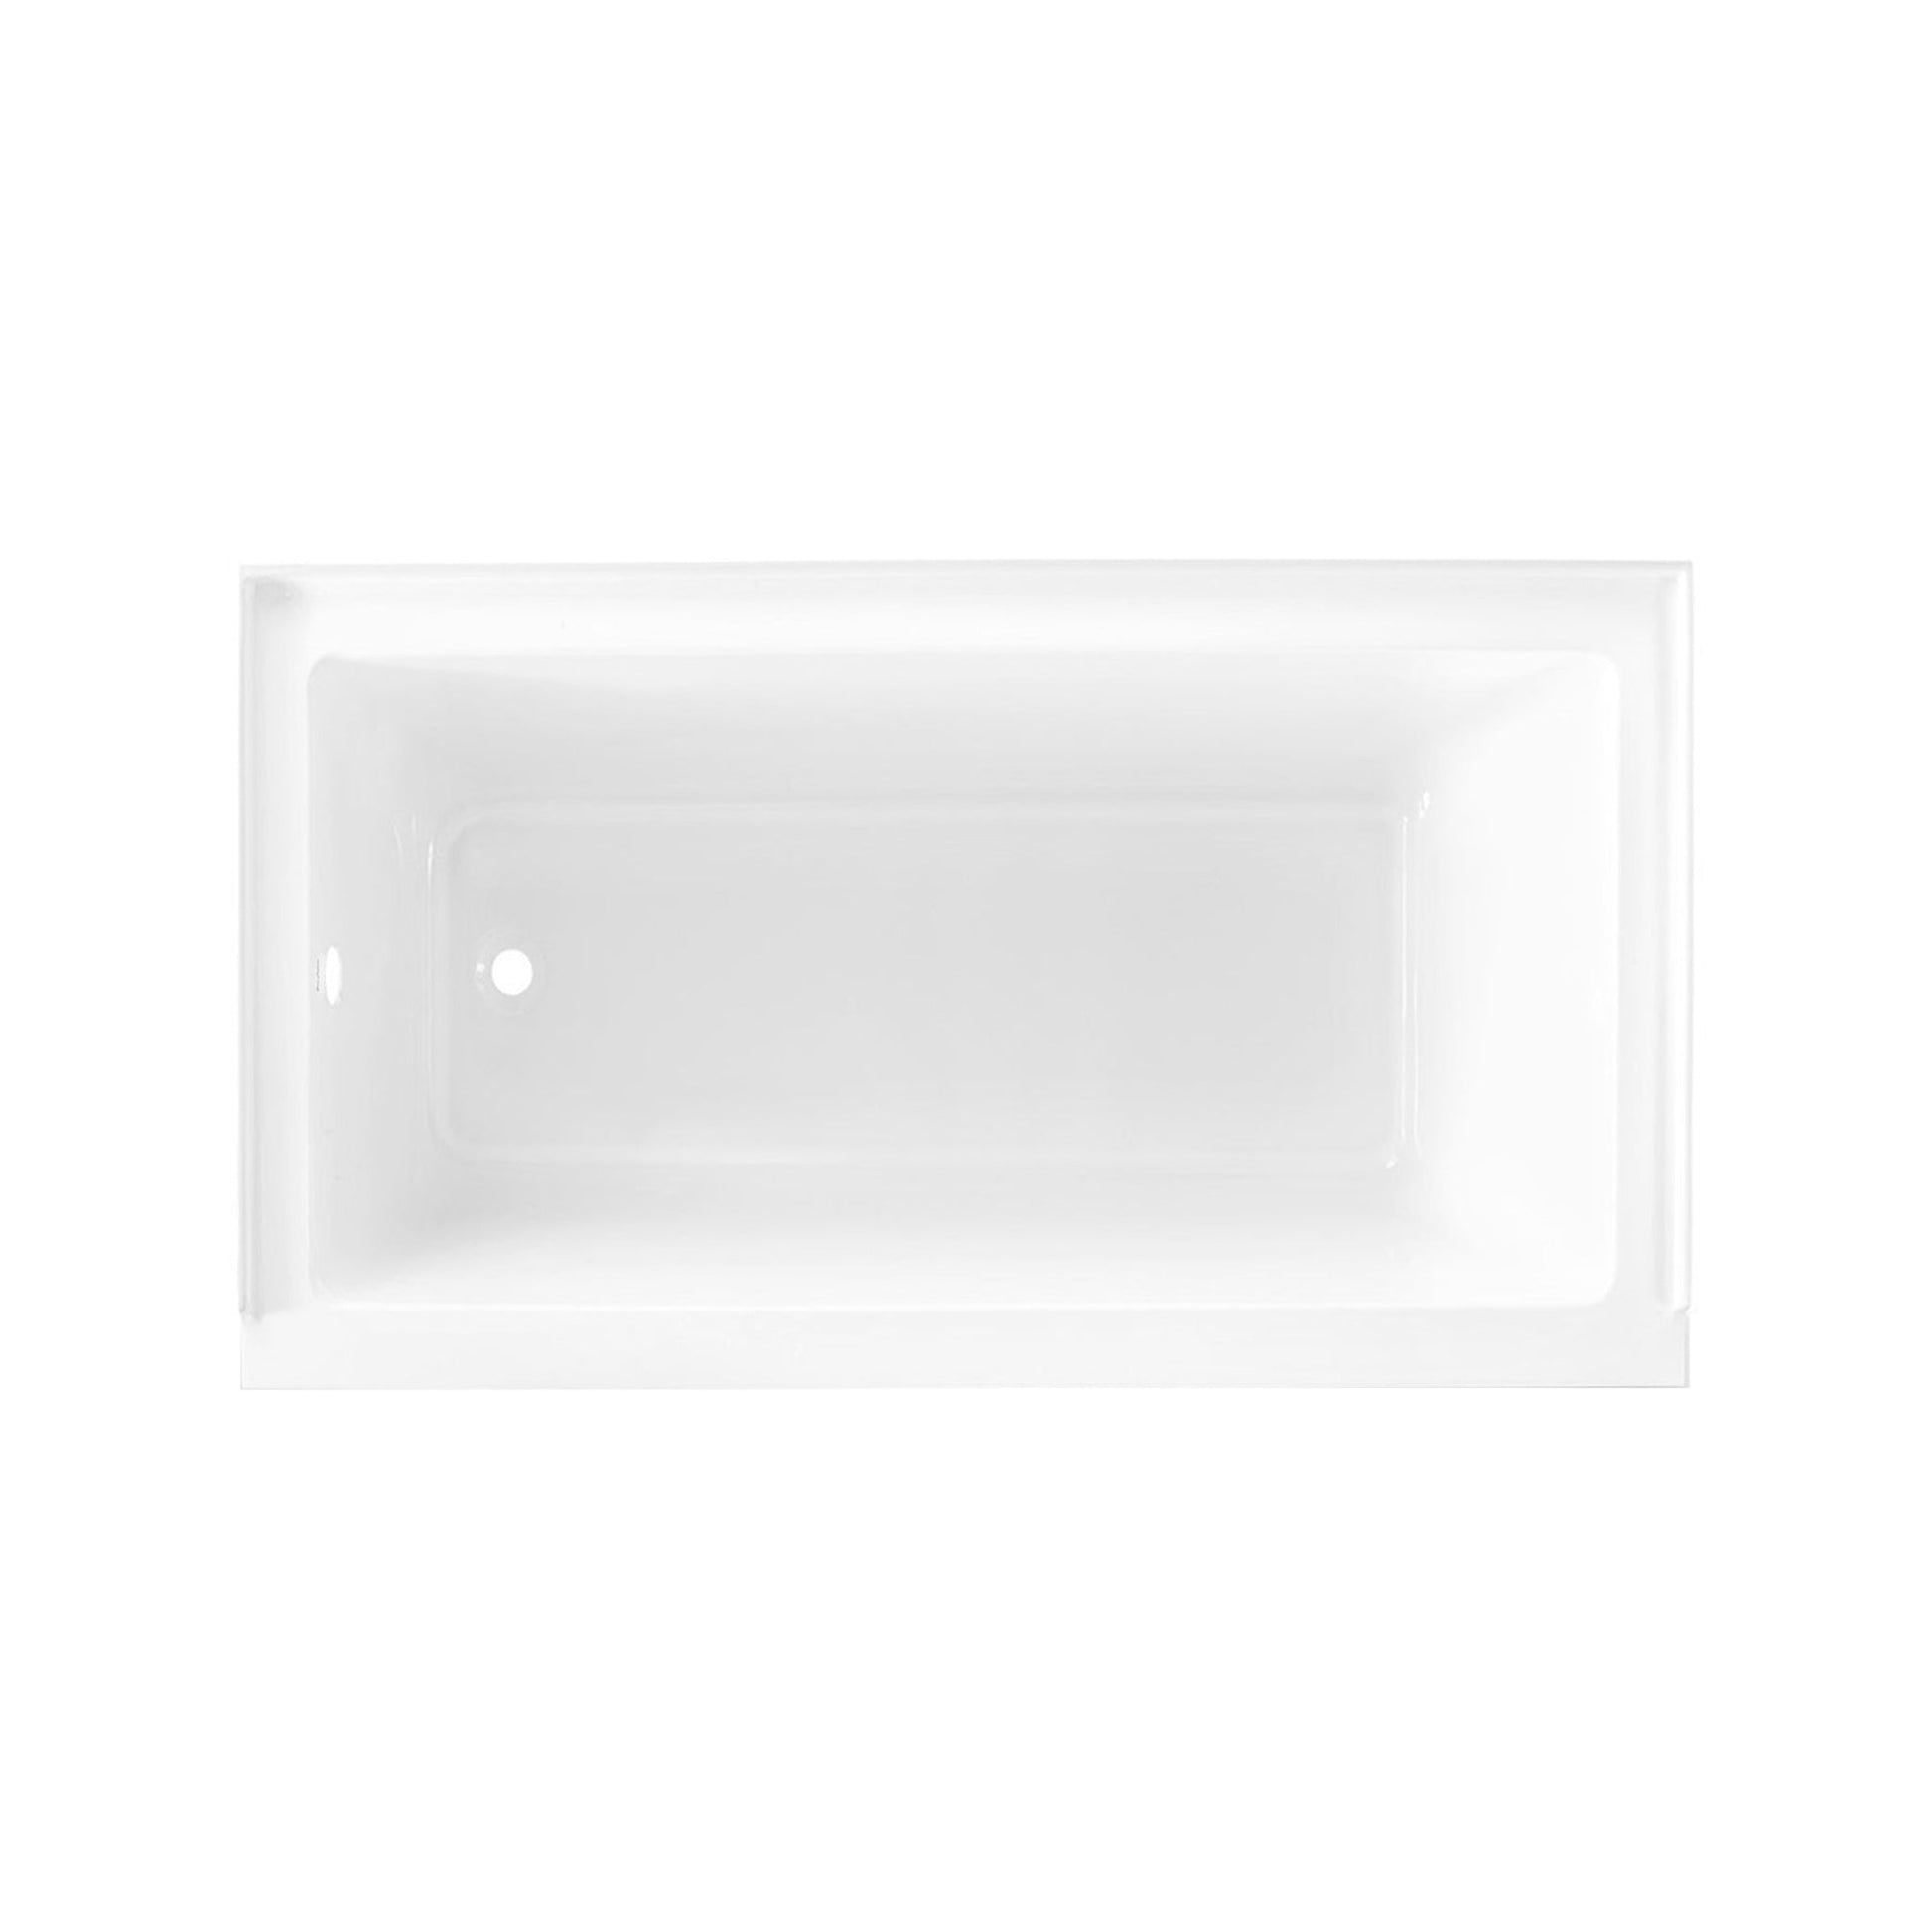 Swiss Madison Voltaire 60" x 32" White Left-Hand Drain Alcove Bathtub With Built-In Flange & Adjustable Feet